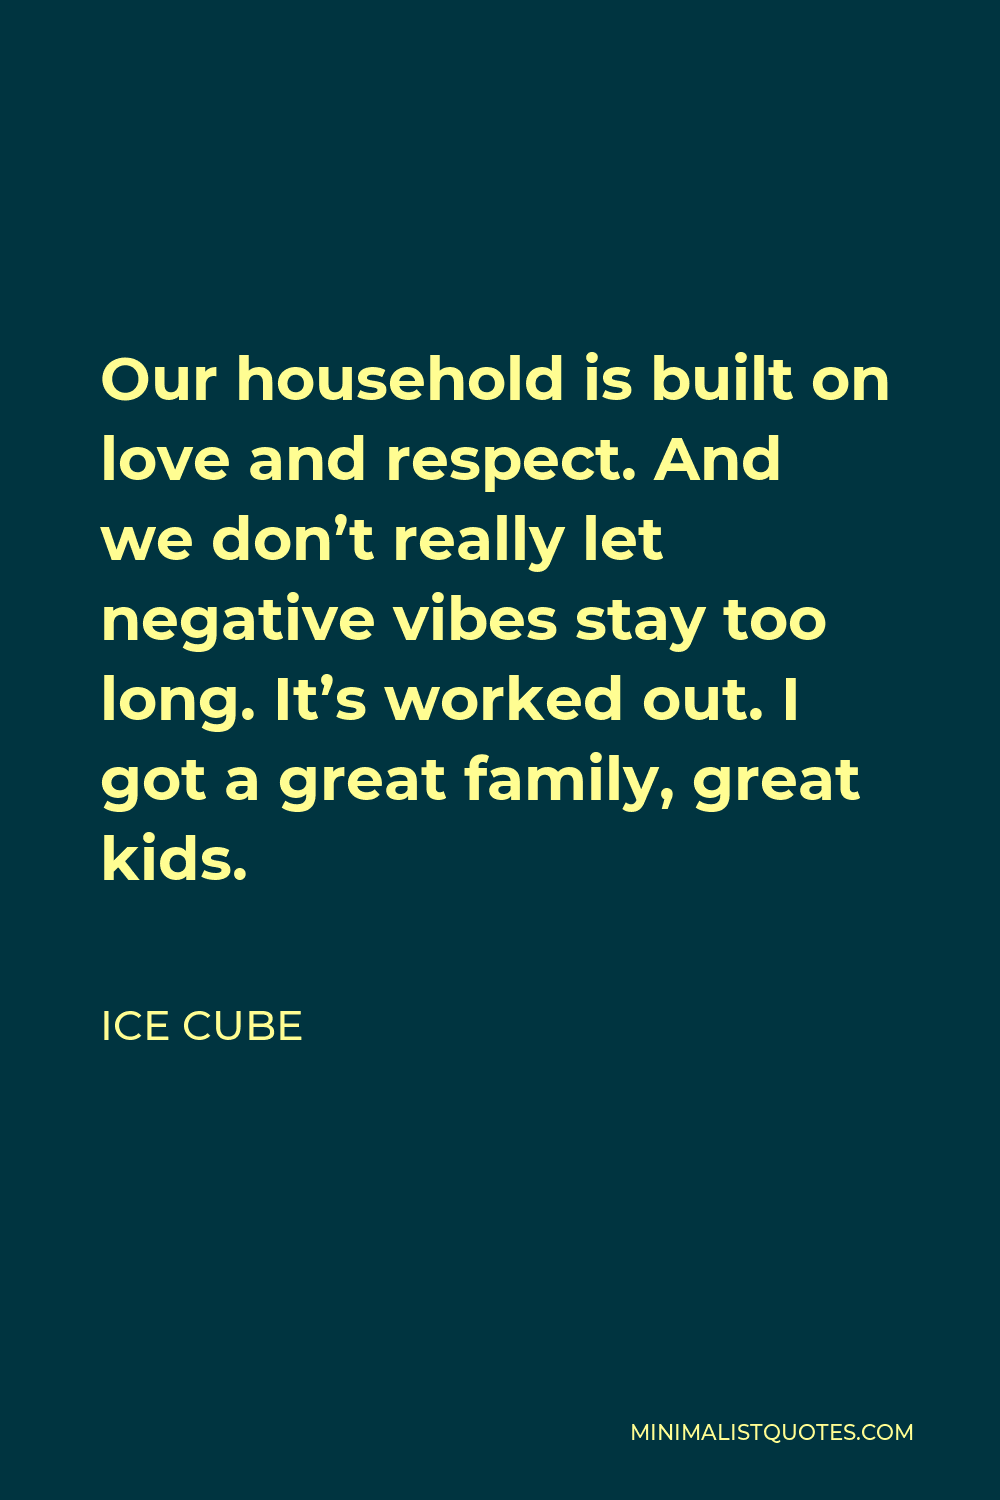 Ice Cube Quote - Our household is built on love and respect. And we don’t really let negative vibes stay too long. It’s worked out. I got a great family, great kids.